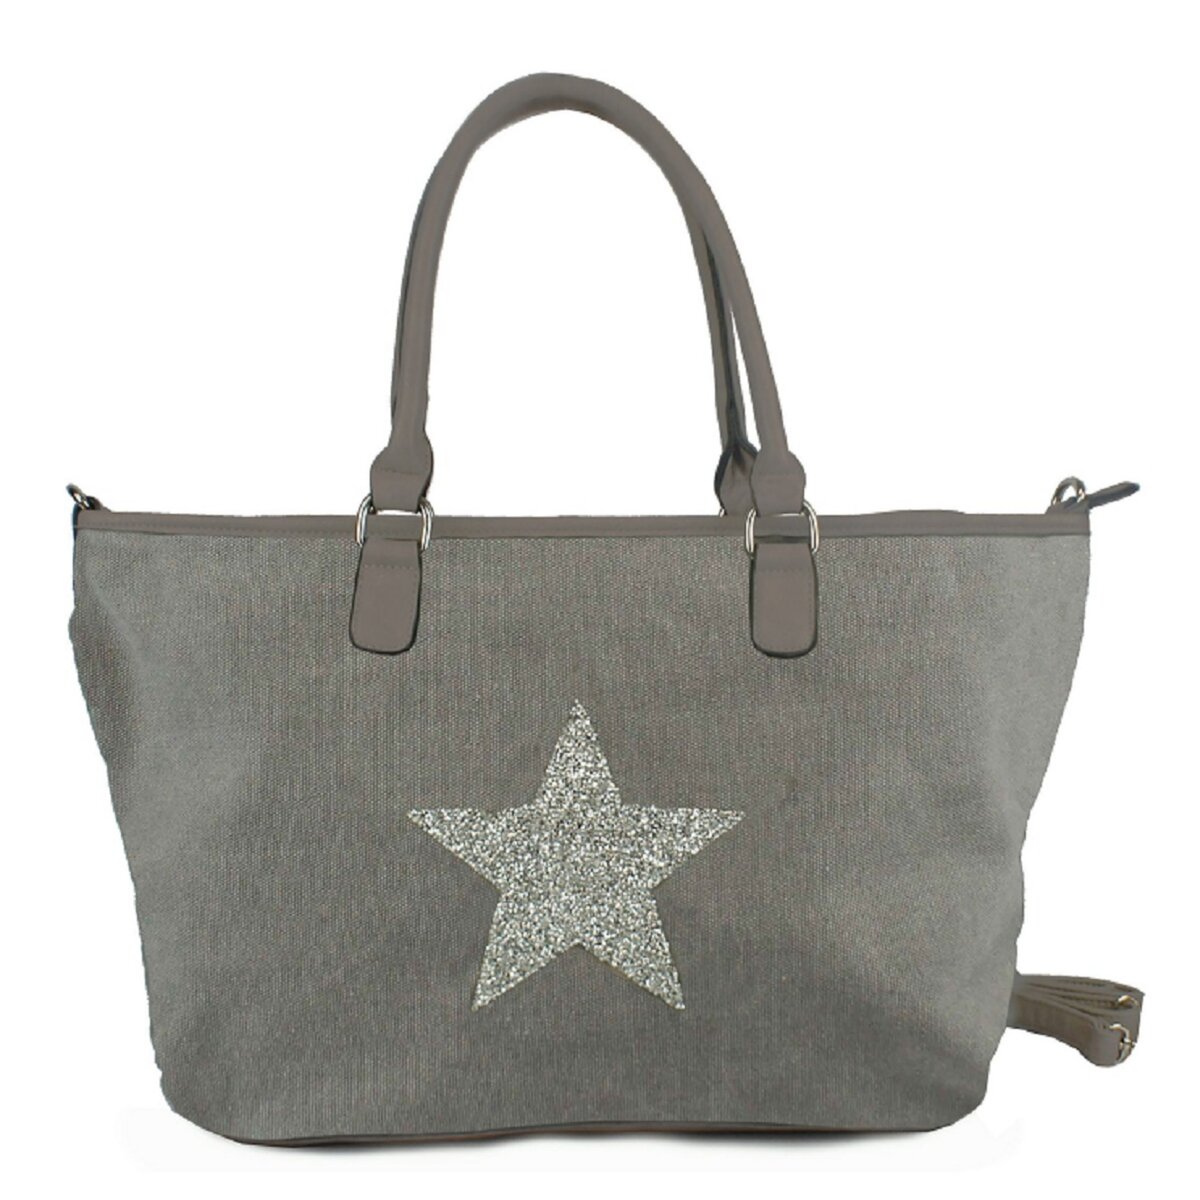 Sac besace strass Etoile - Gris